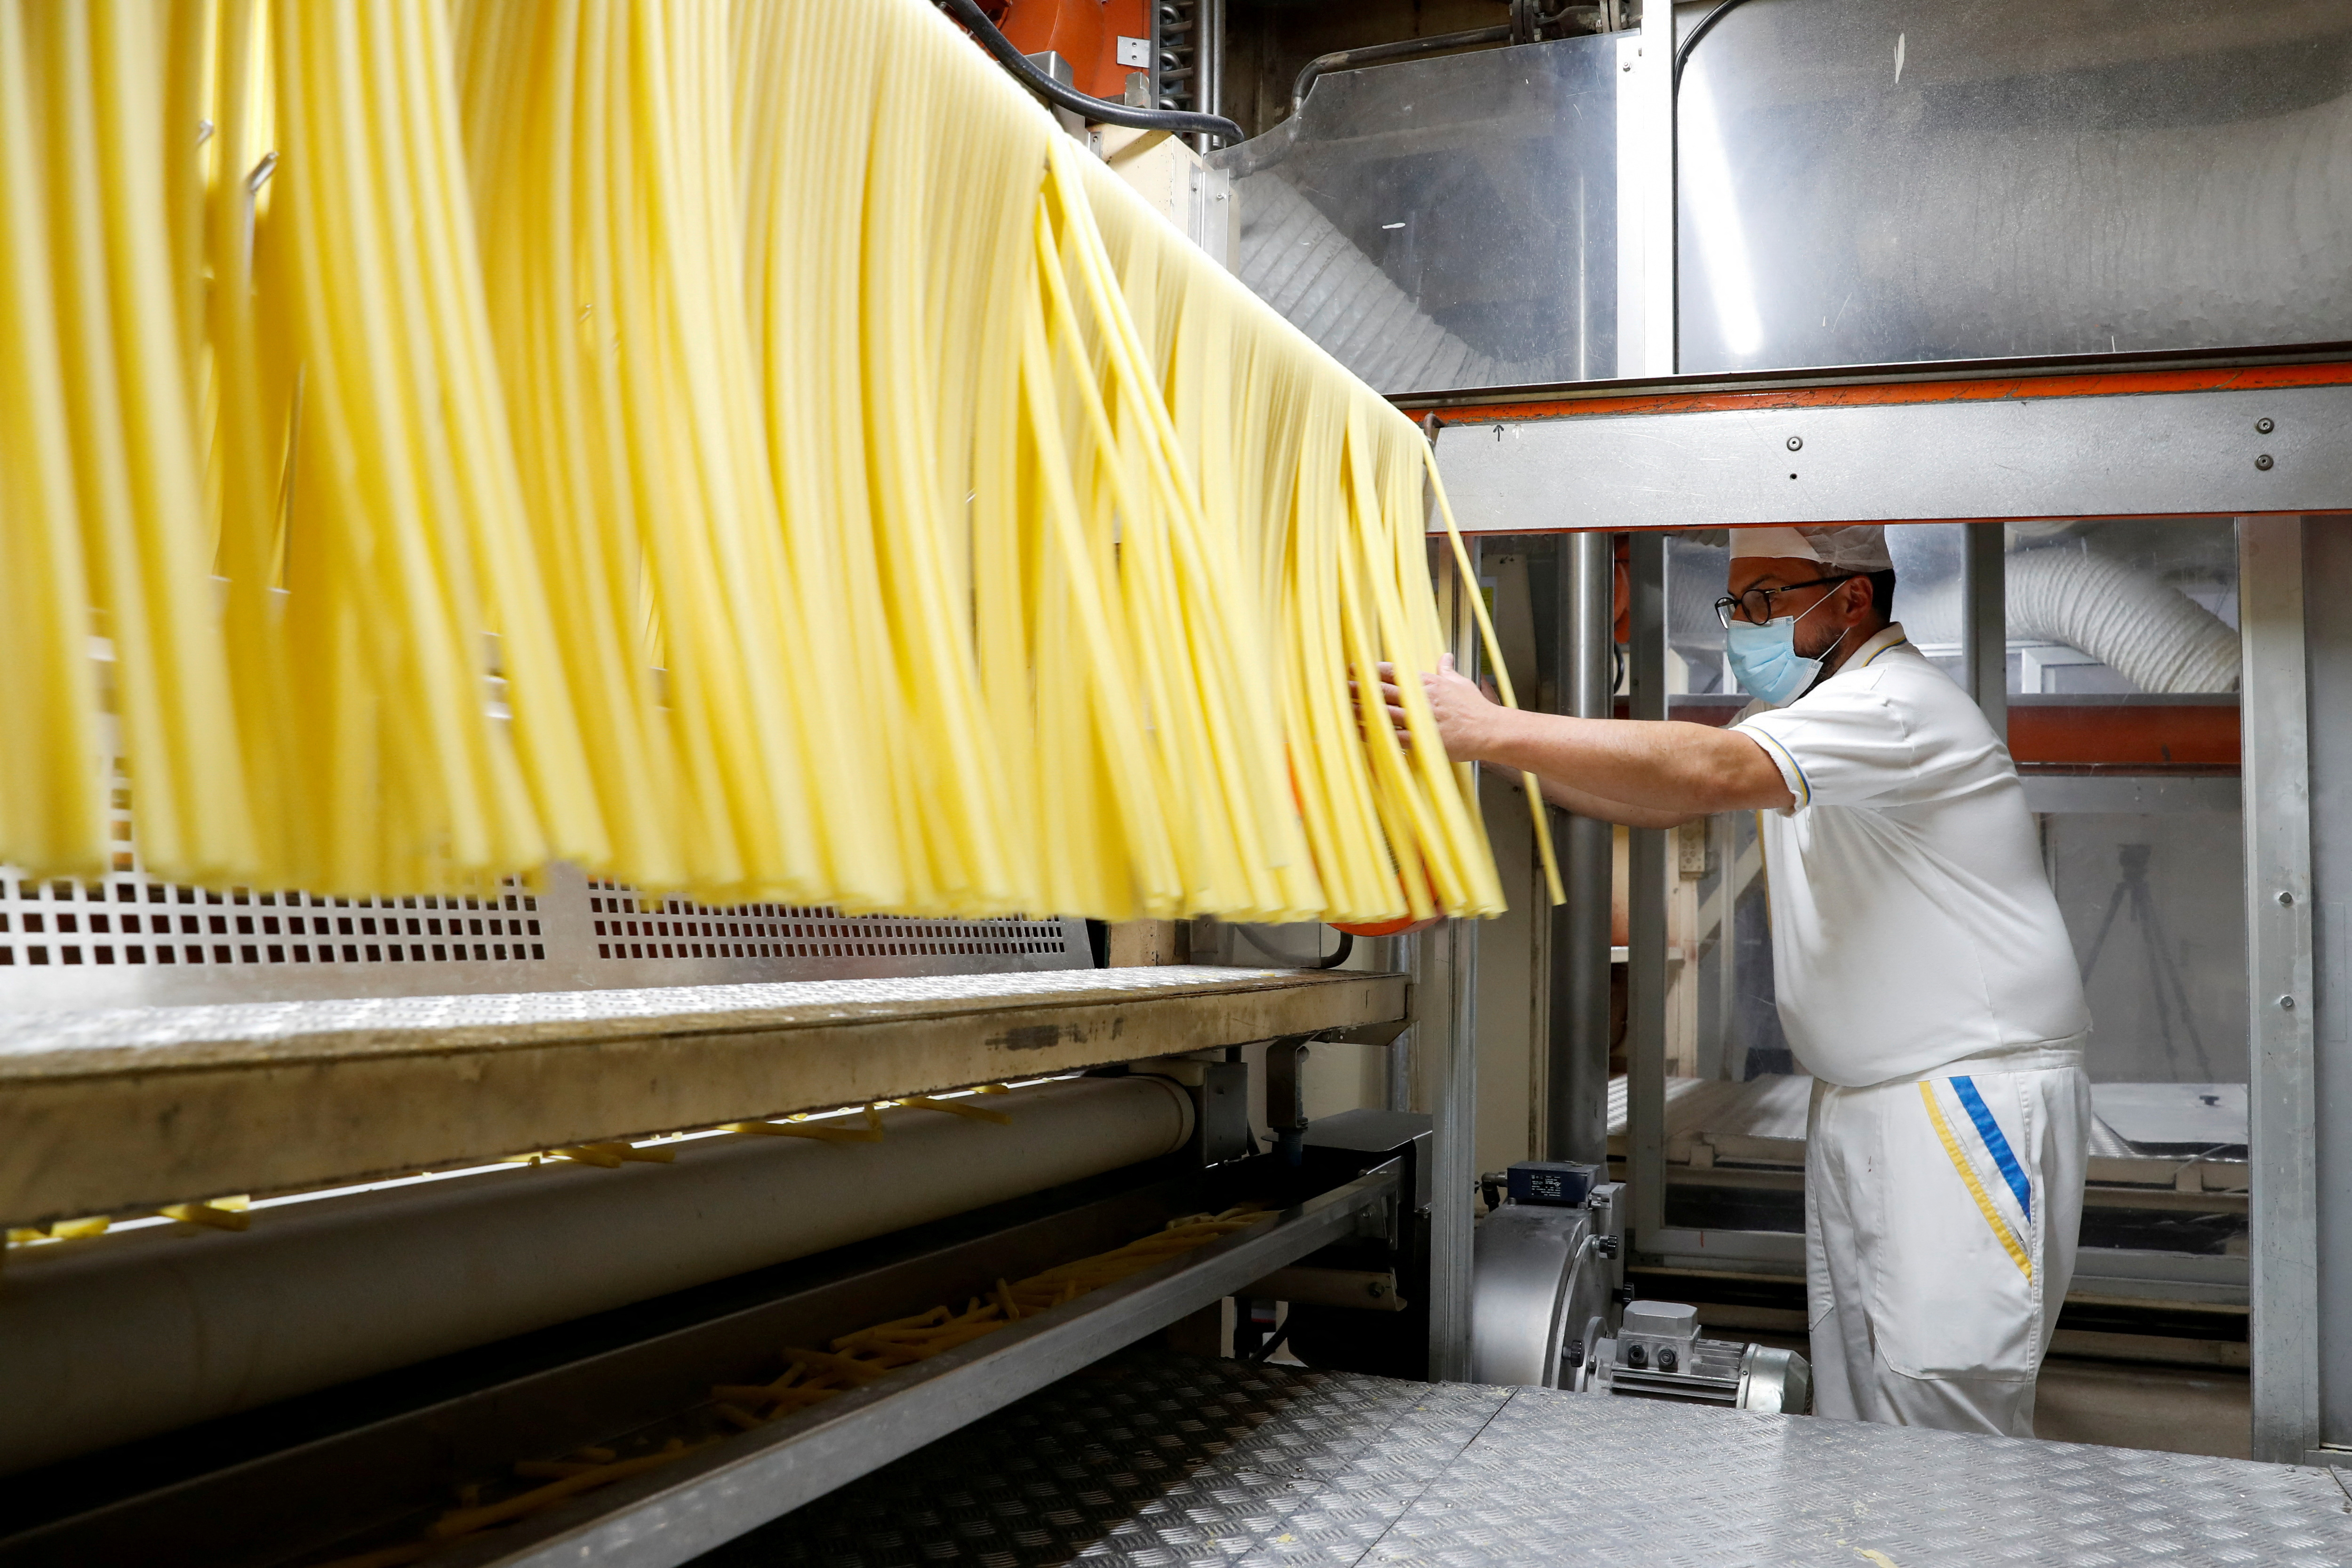 High pasta prices set to boil over as Canada's wheat withers